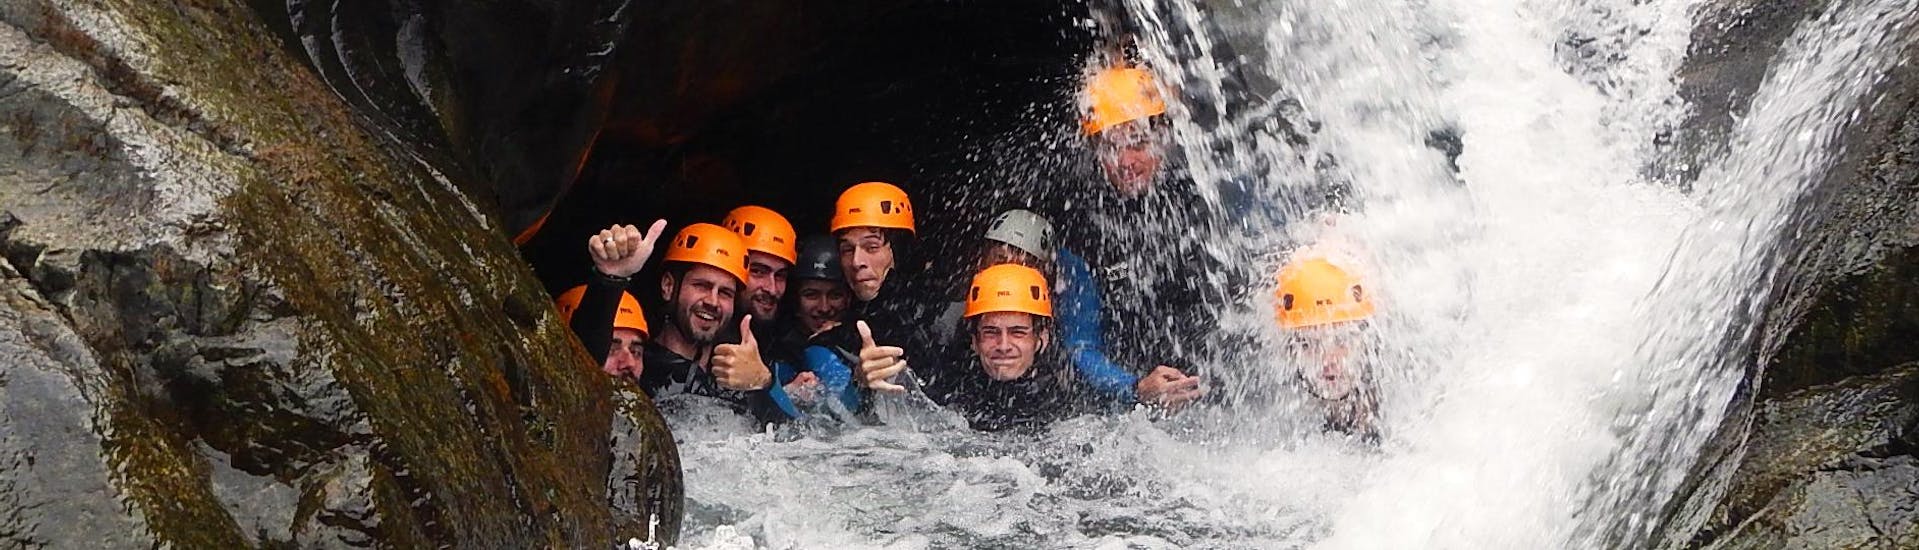 Canyoning for Everyone - Canyon du Soucy.